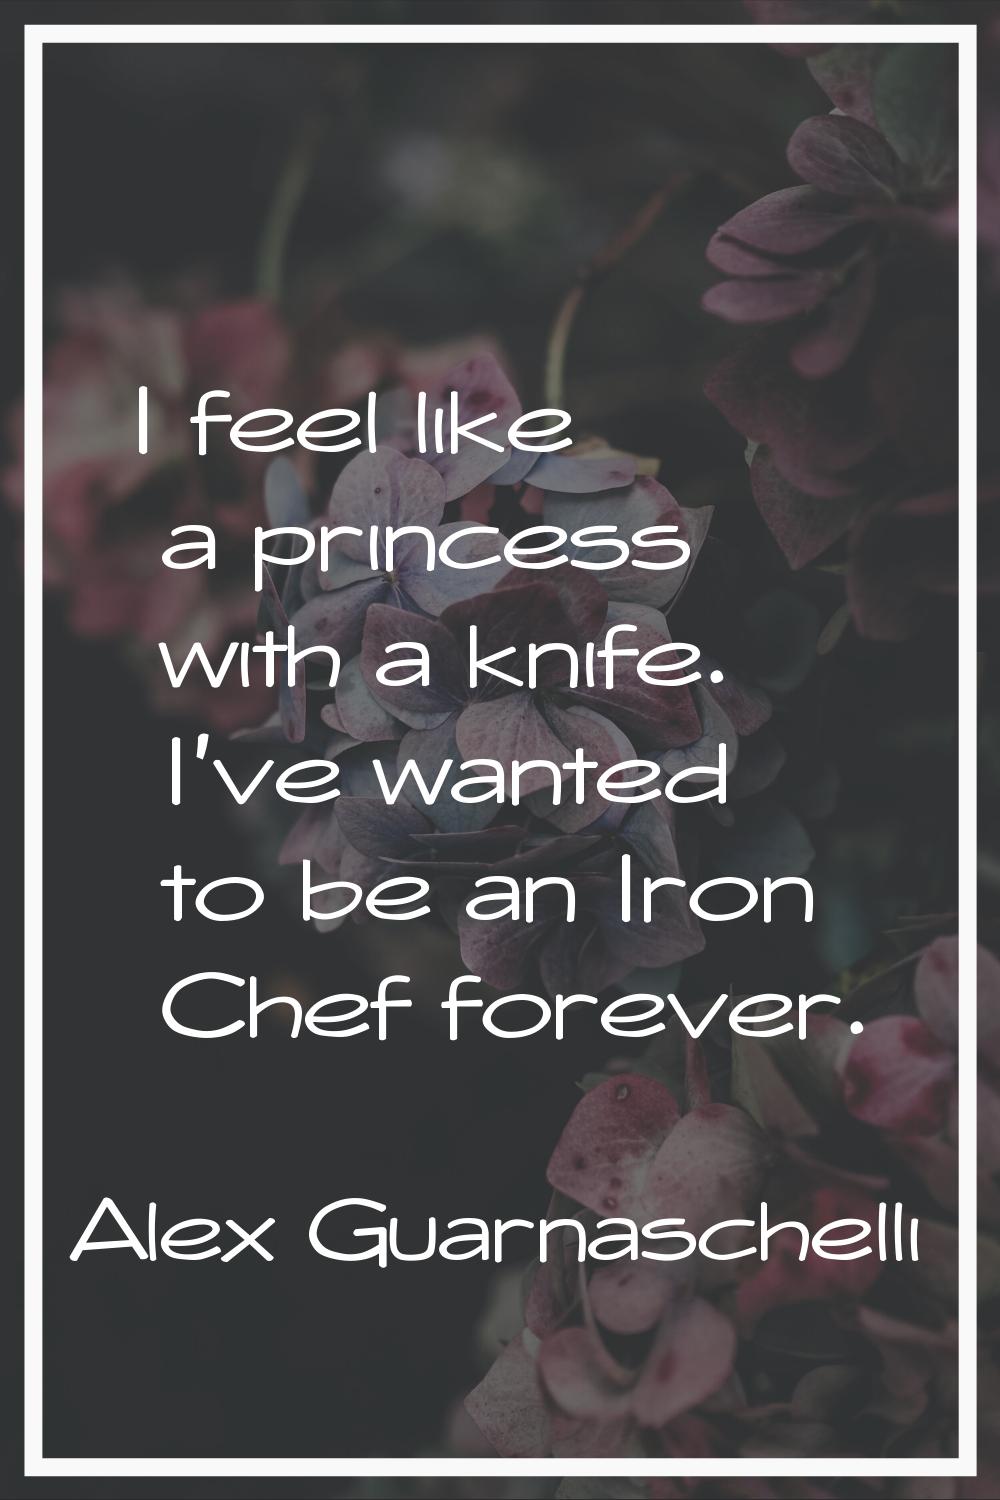 I feel like a princess with a knife. I've wanted to be an Iron Chef forever.